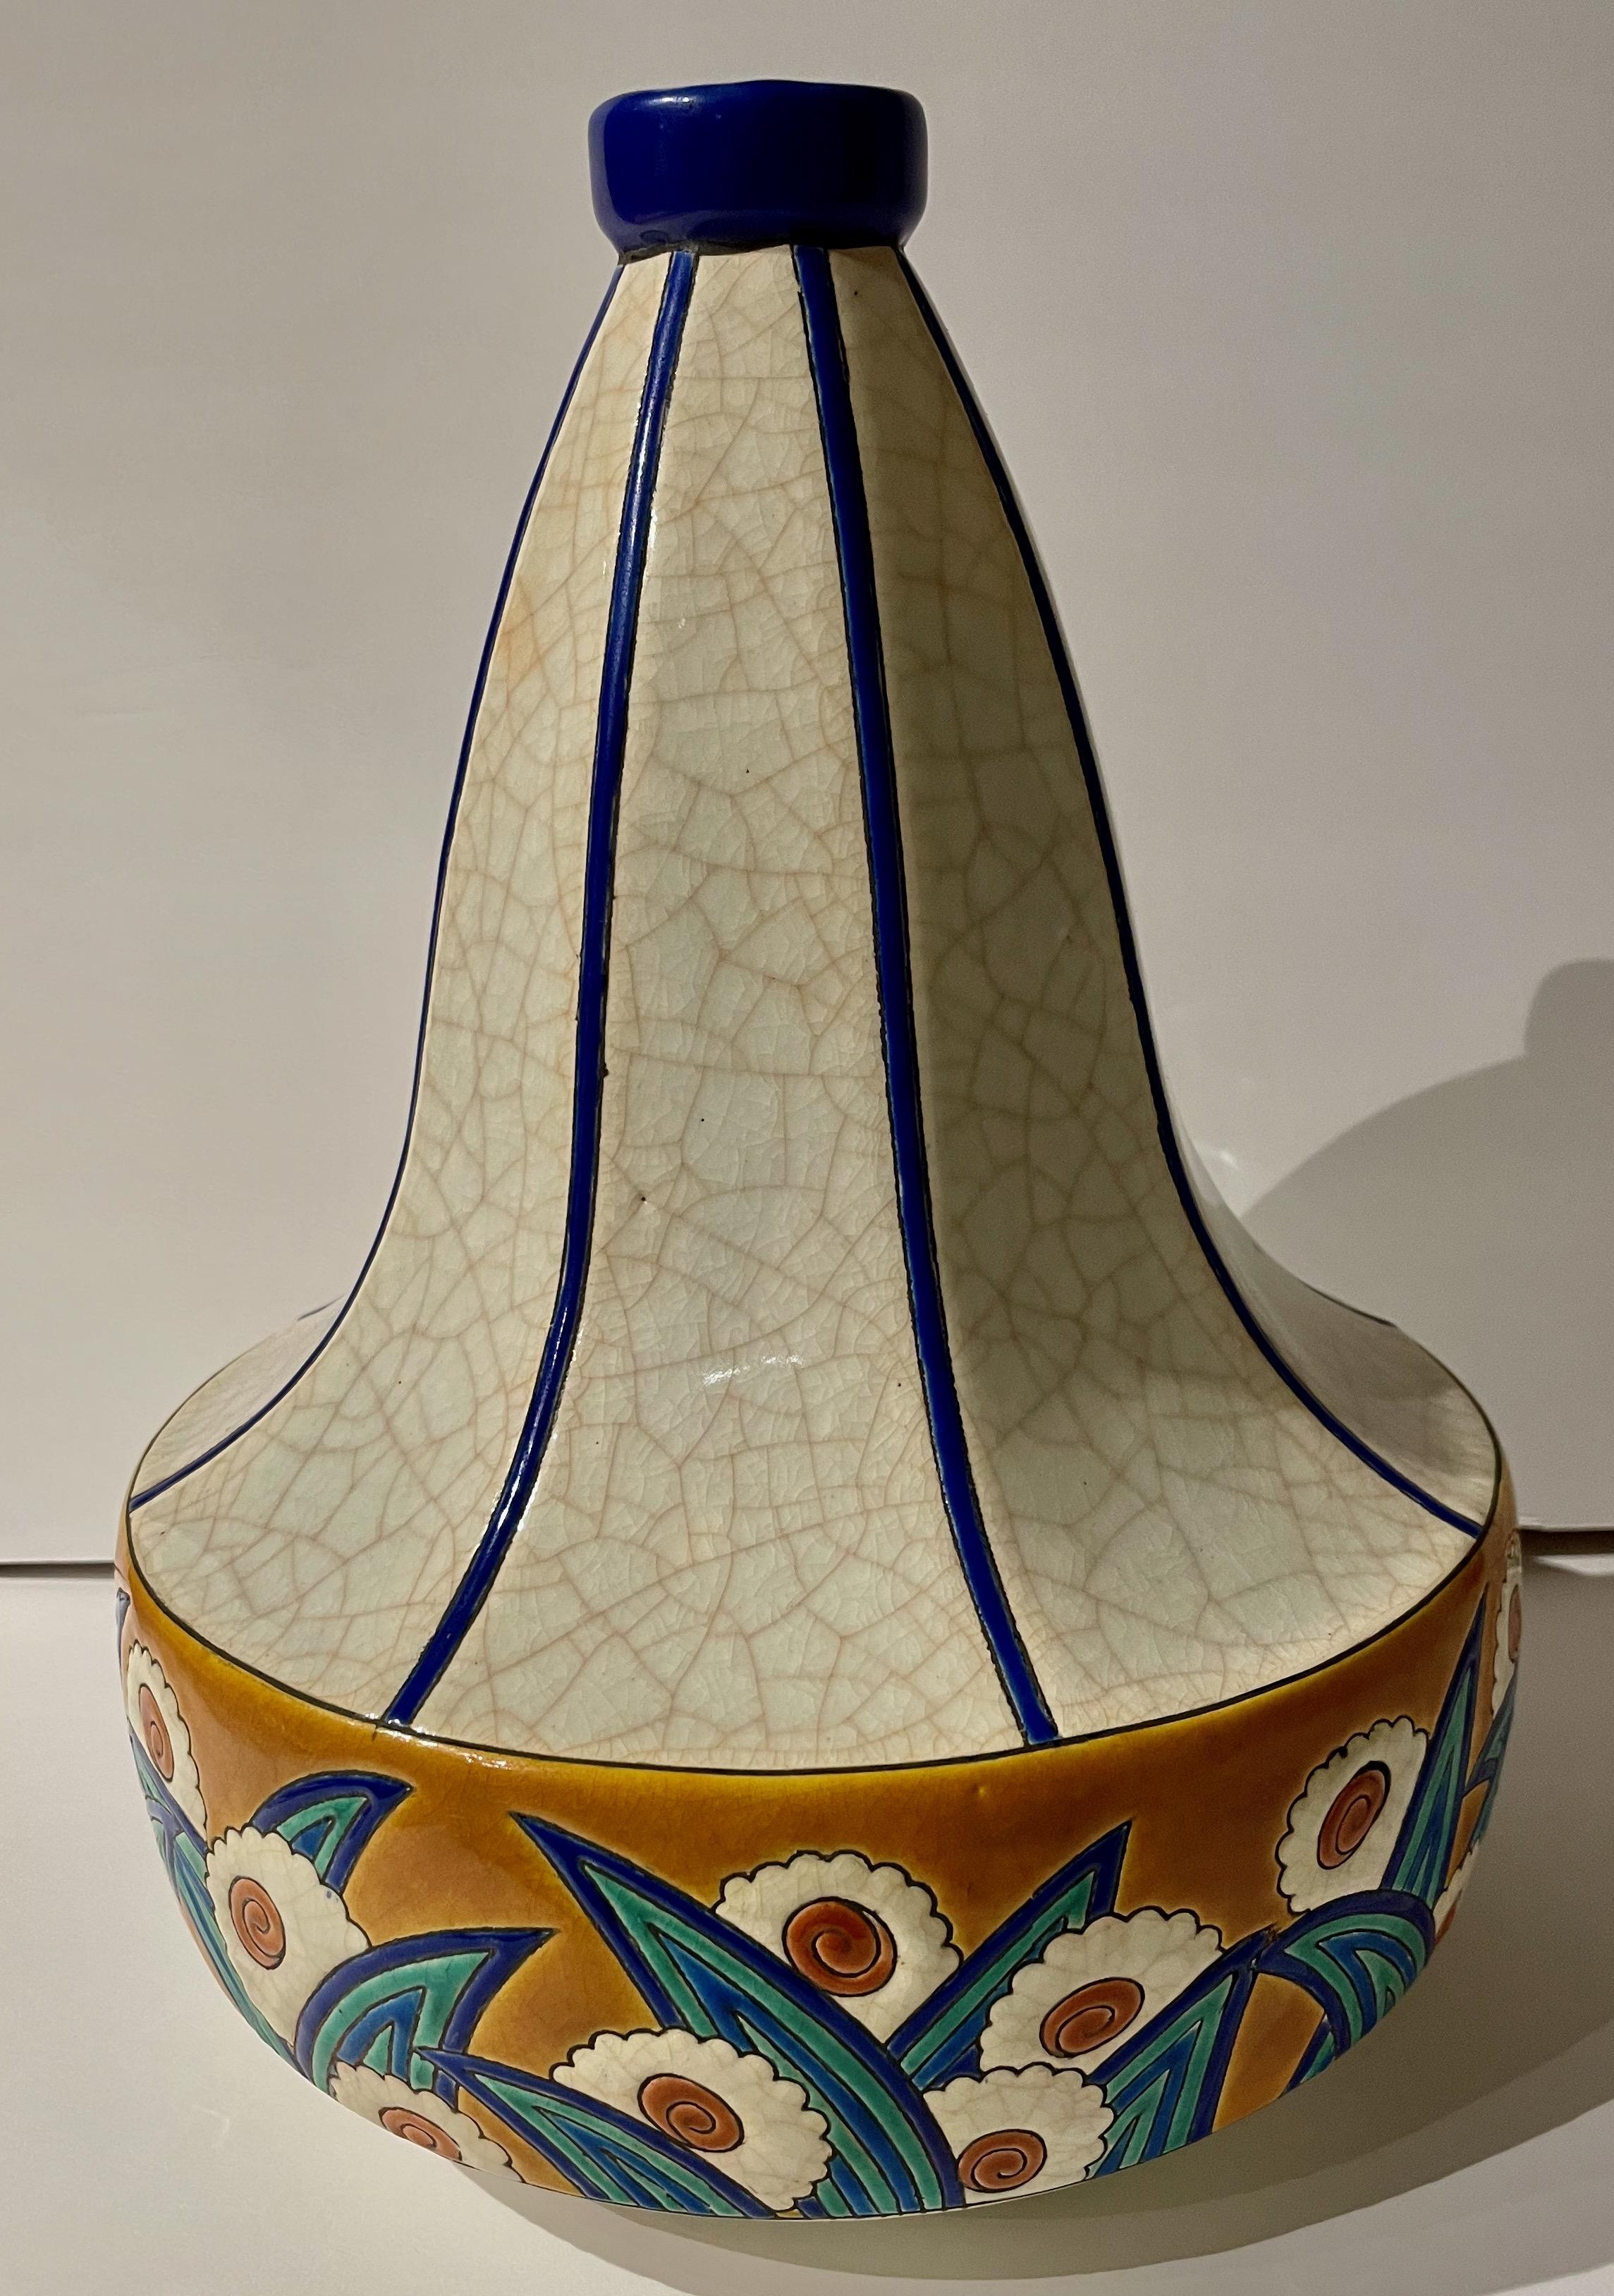 Longwy Art Deco French Cloisonné Ceramic Geometric Gourd Shape, Large Vase, bright color with stunning blues, classic gourd shape. Repeated floral and leaf designs with bright colors, blues, and crackle cream to create a dynamic pattern rarely seen